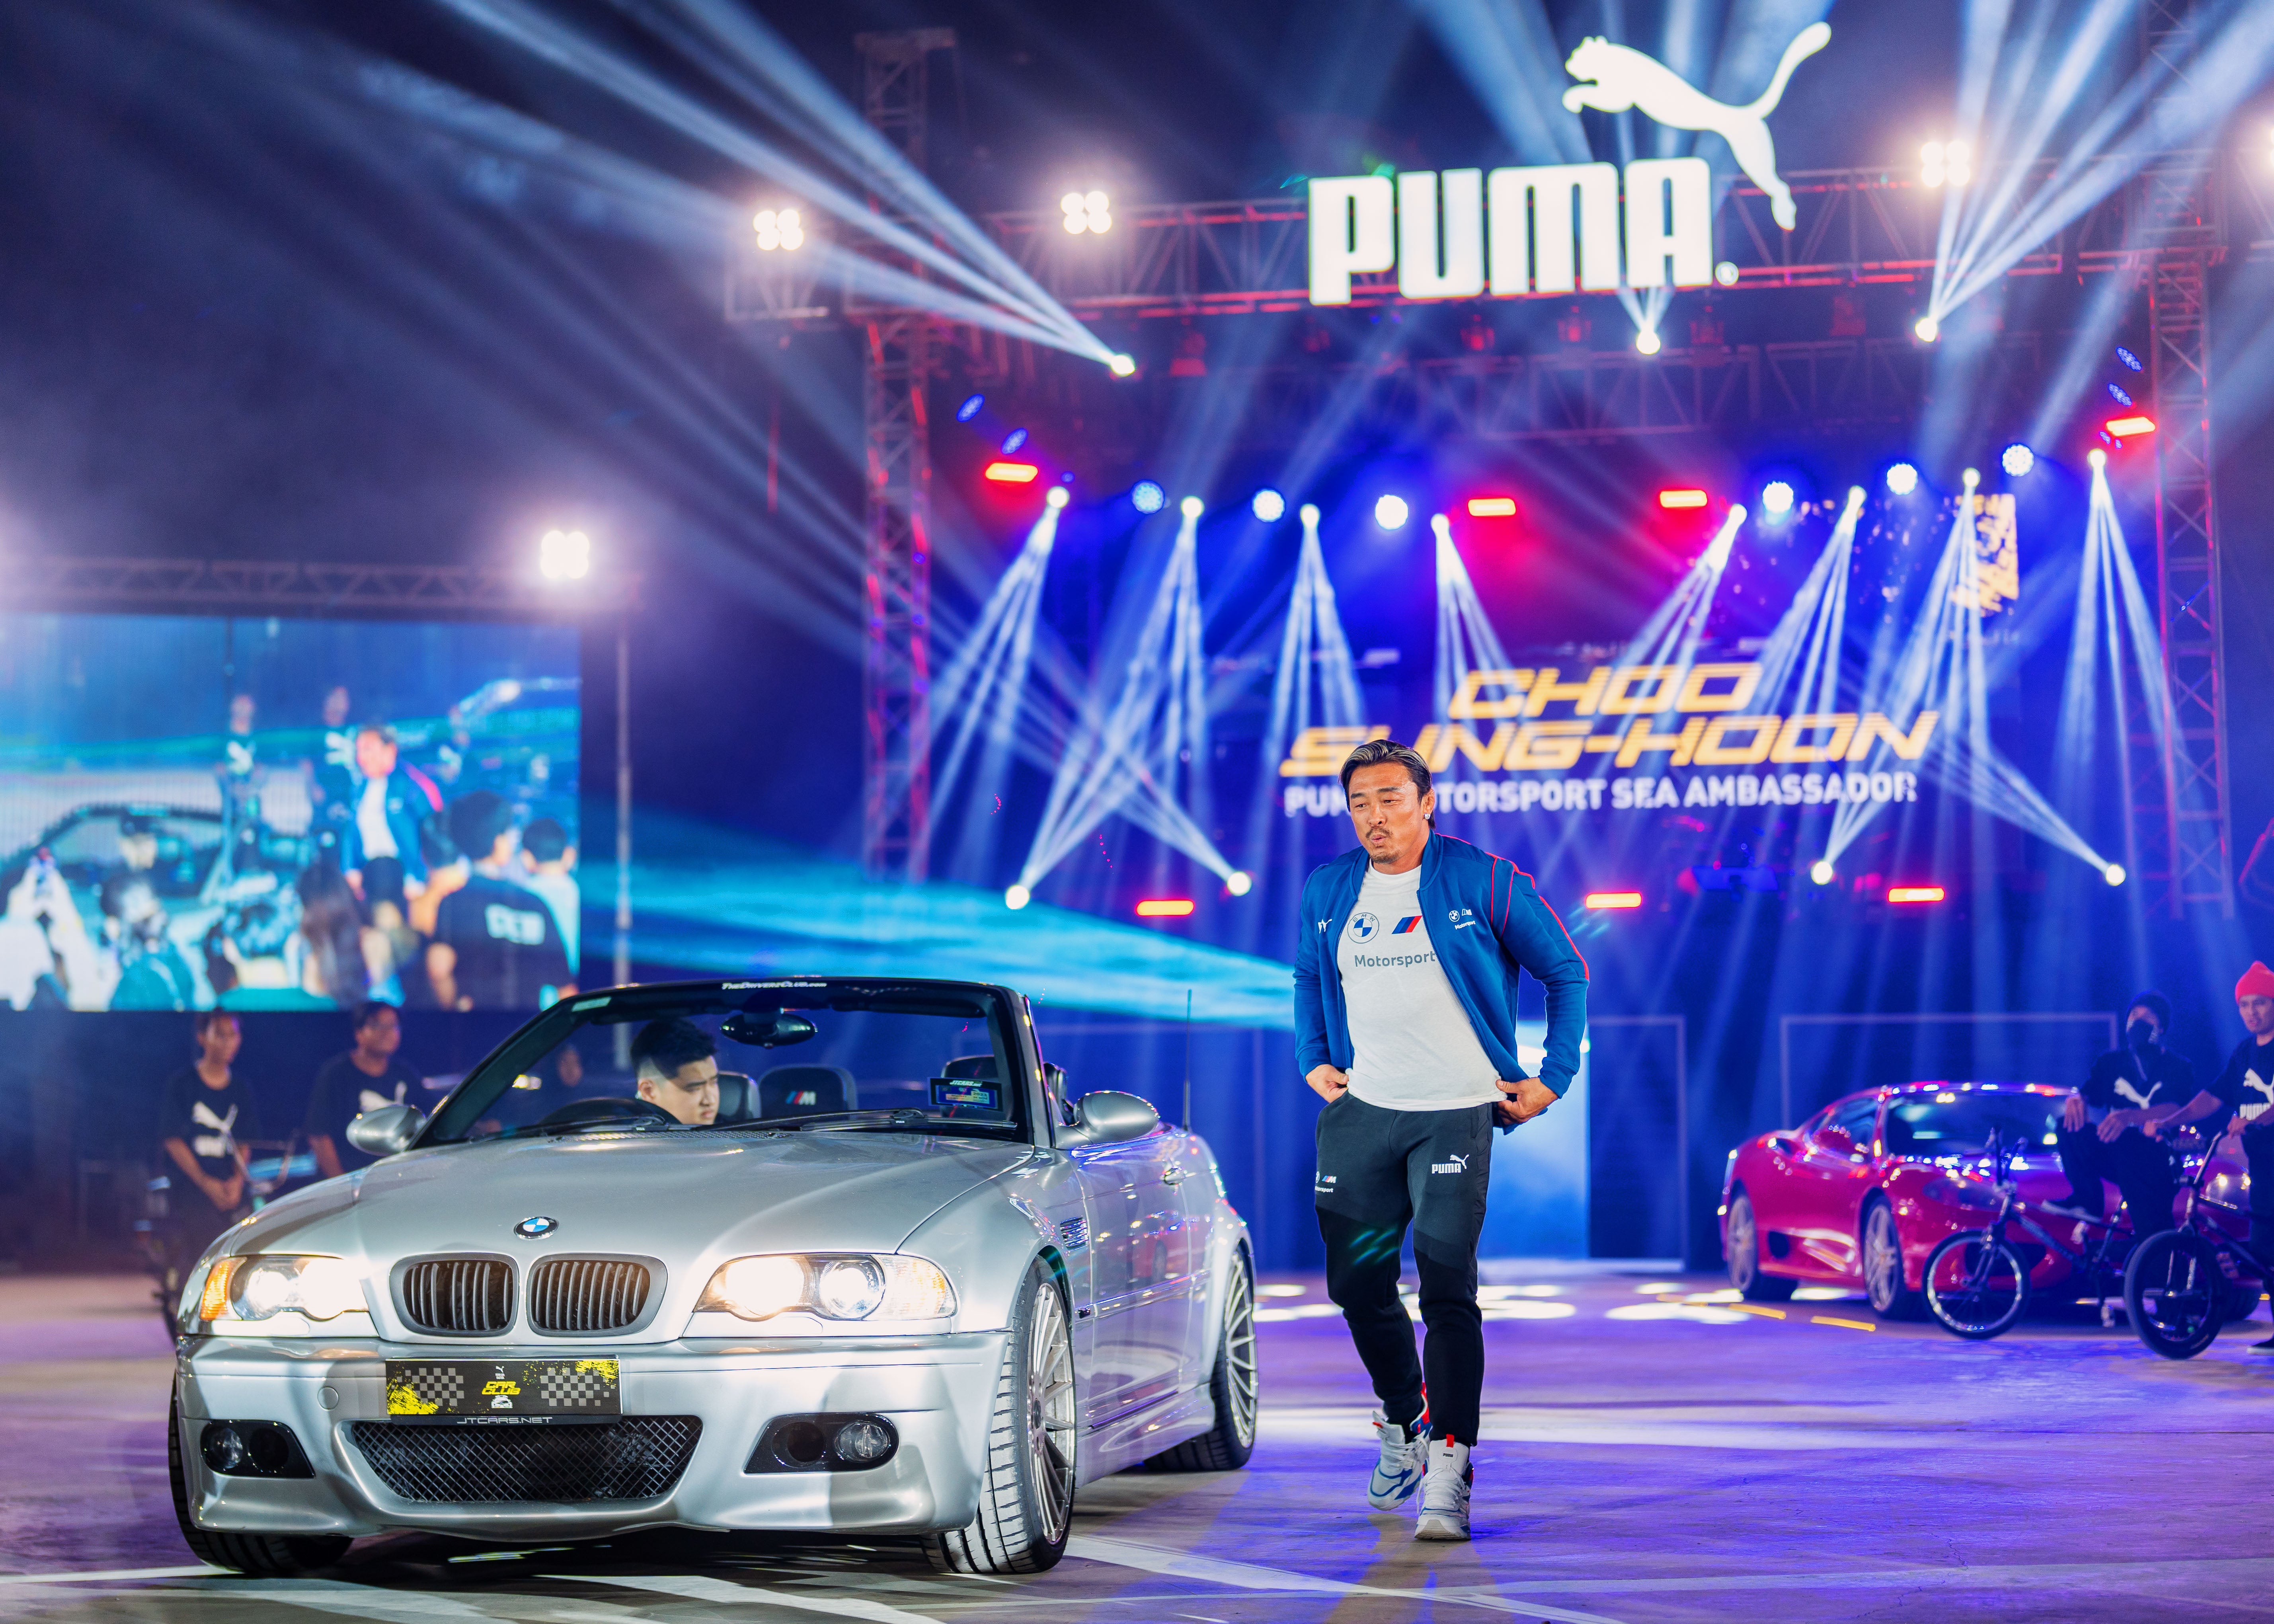 1. Choo Sung hoon a.k.a Sexyama makes his special appearance at the inaugural PUMA Car Club Event in SEA 1